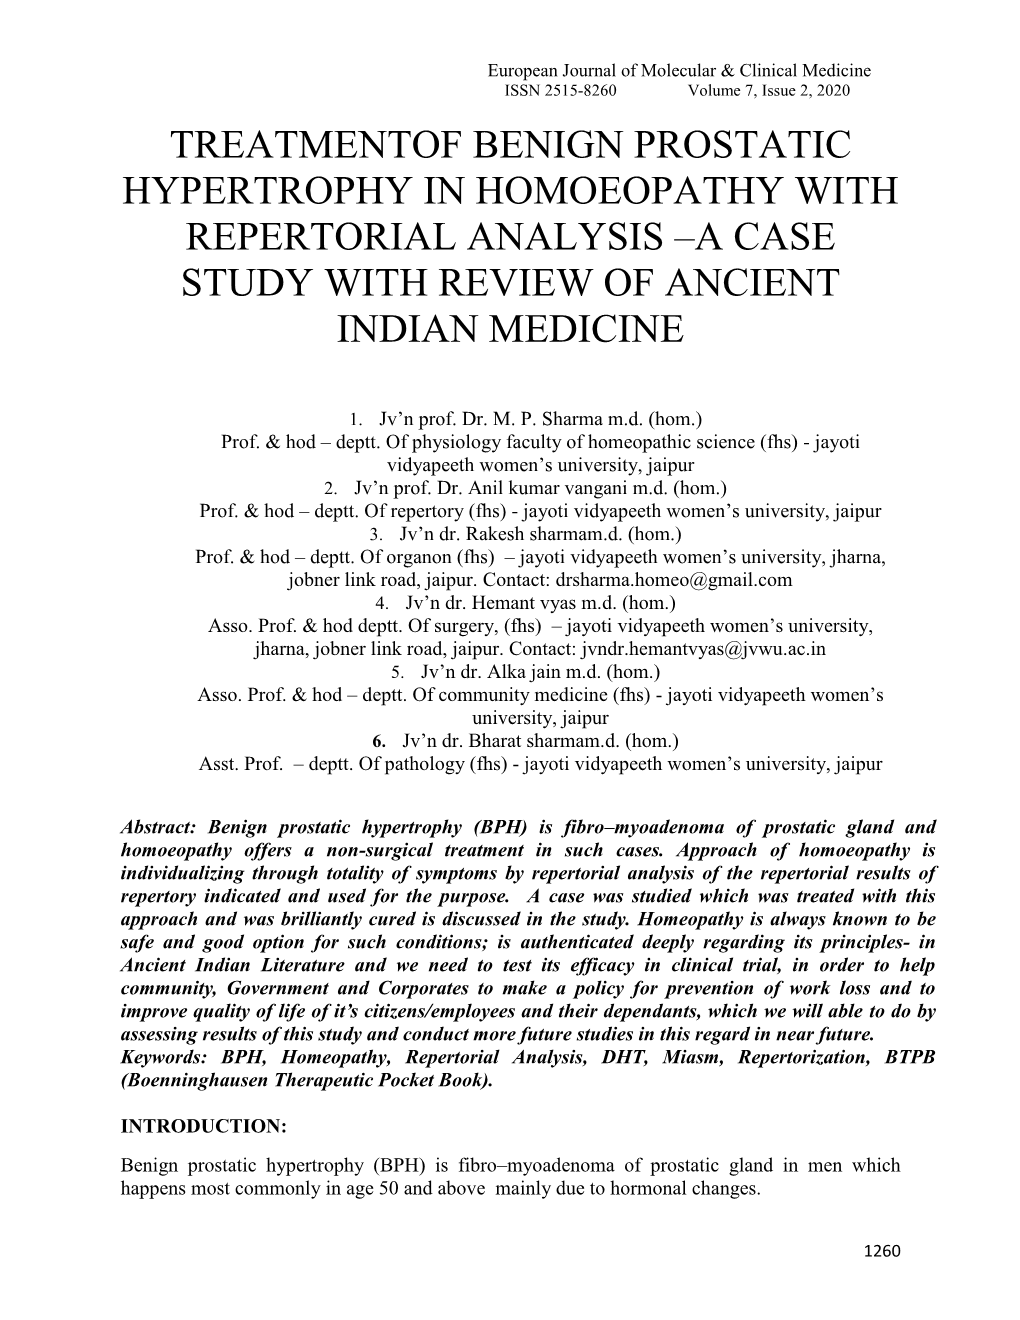 Treatmentof Benign Prostatic Hypertrophy in Homoeopathy with Repertorial Analysis –A Case Study with Review of Ancient Indian Medicine